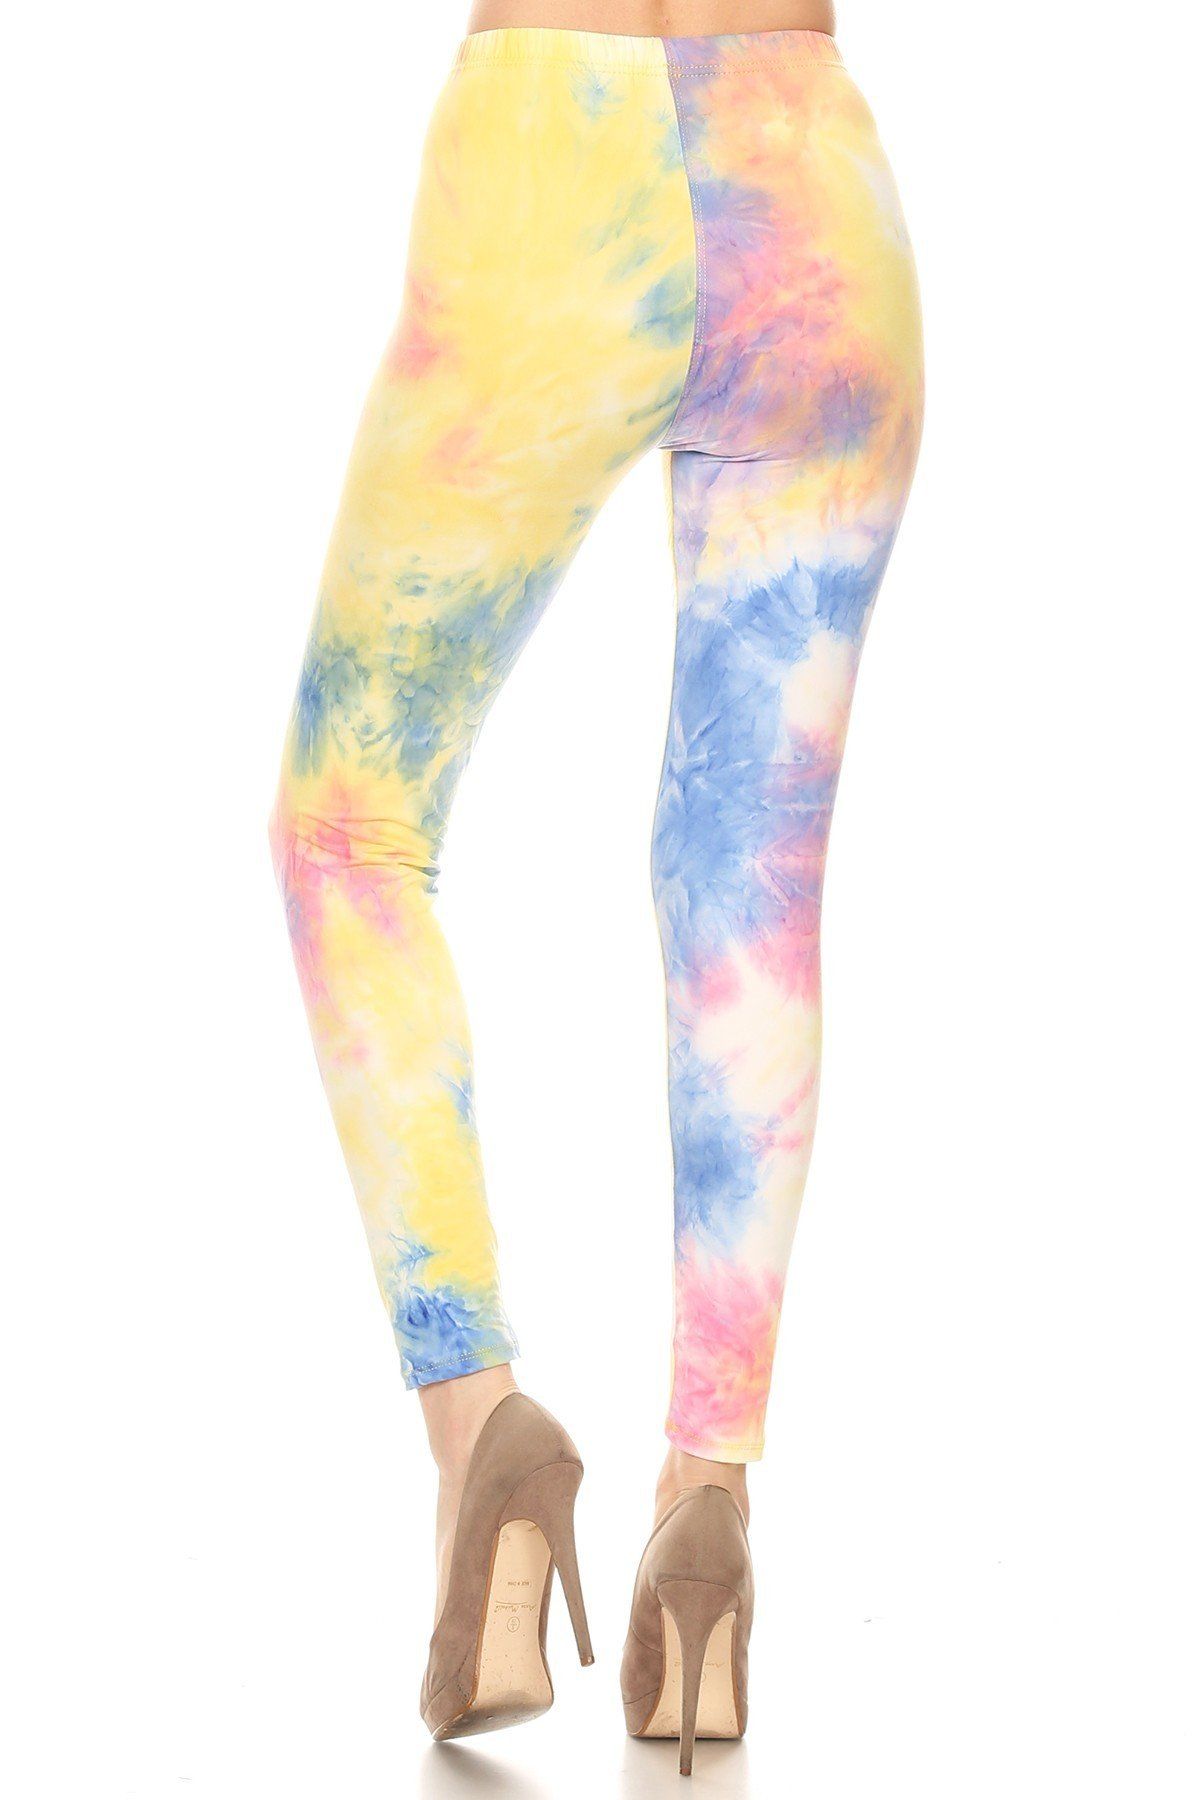 Tie Dye Printed, Full Length, High Waisted Leggings In A Fitted Style With An Elastic Waistband - Fashion Quality Boutik